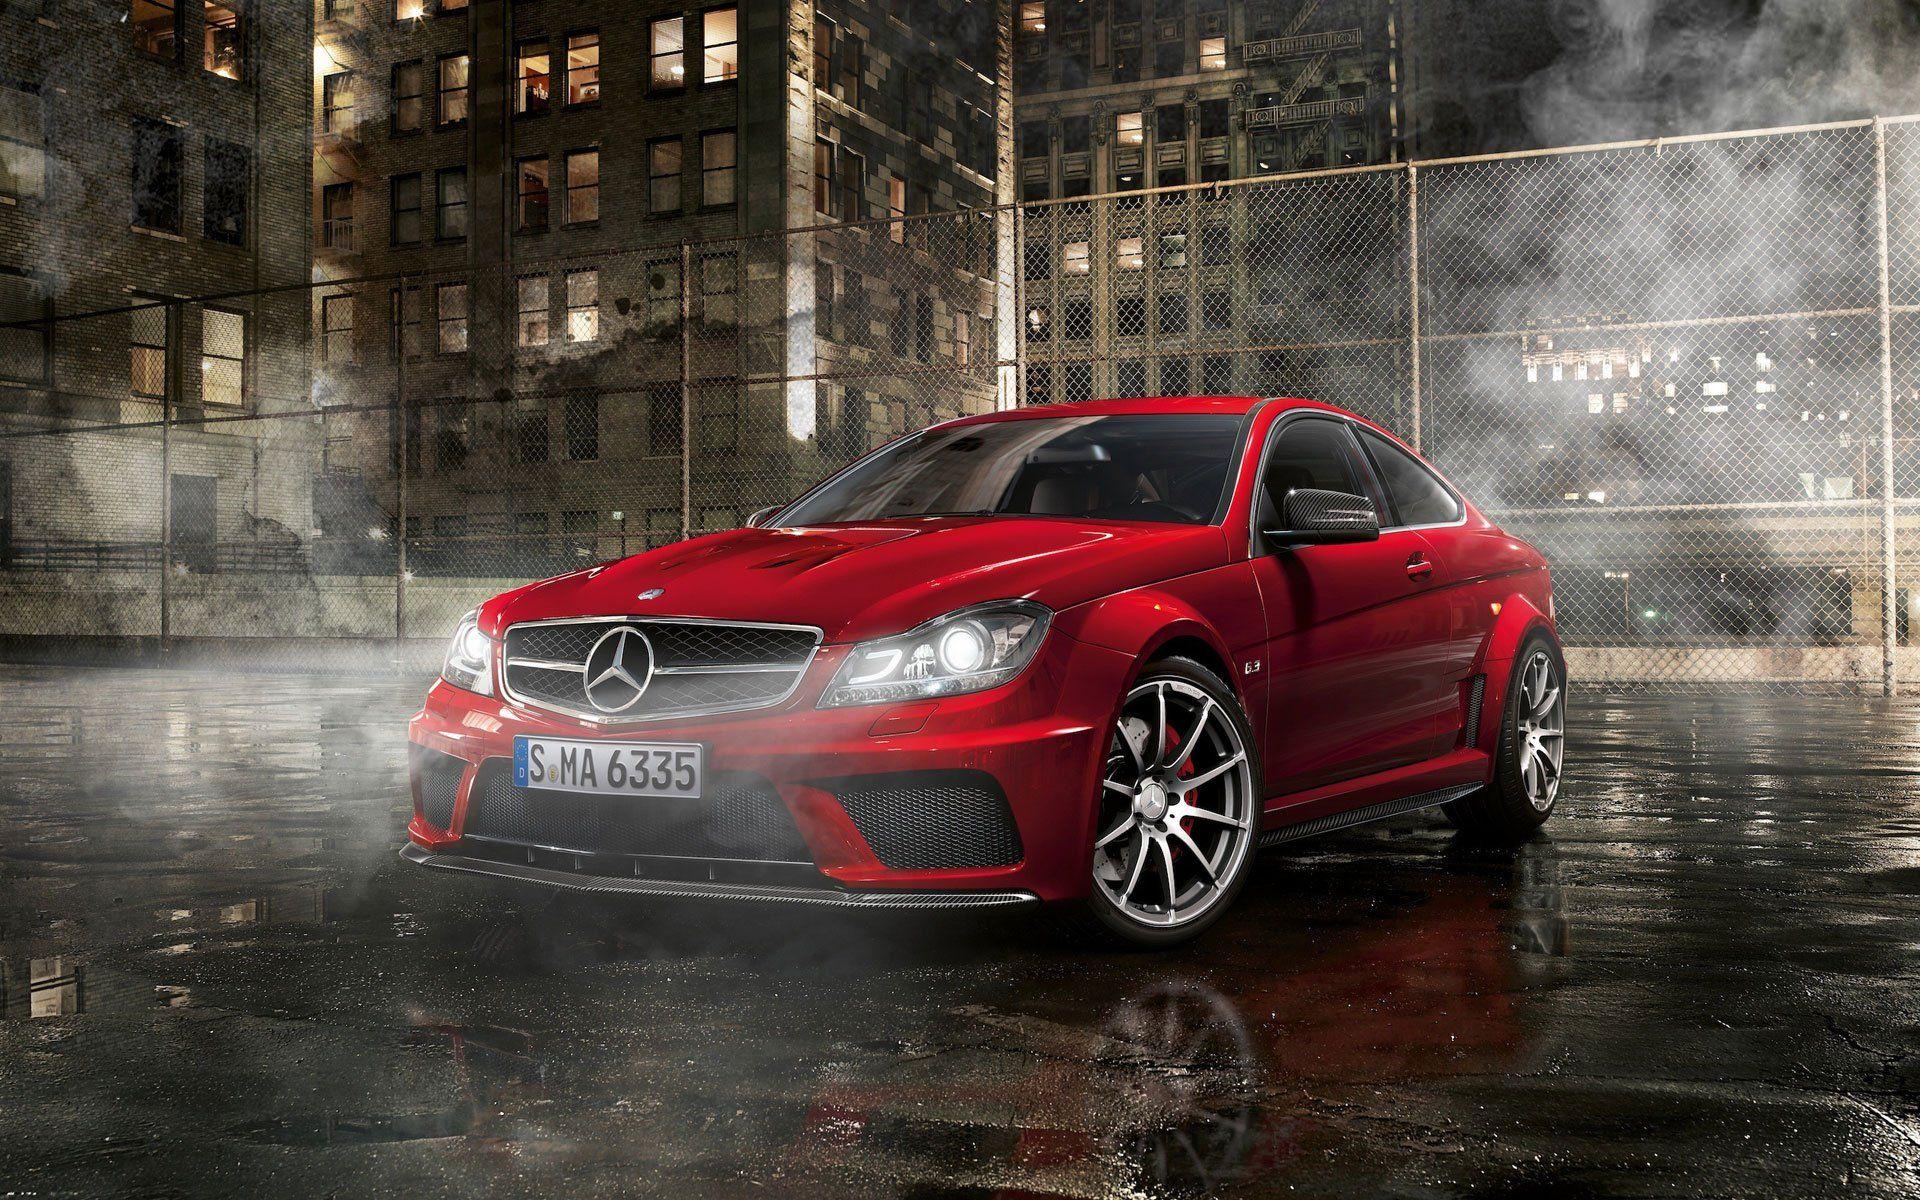 Mercedes Amg C63 S Coupe Edition Wallpaper Free